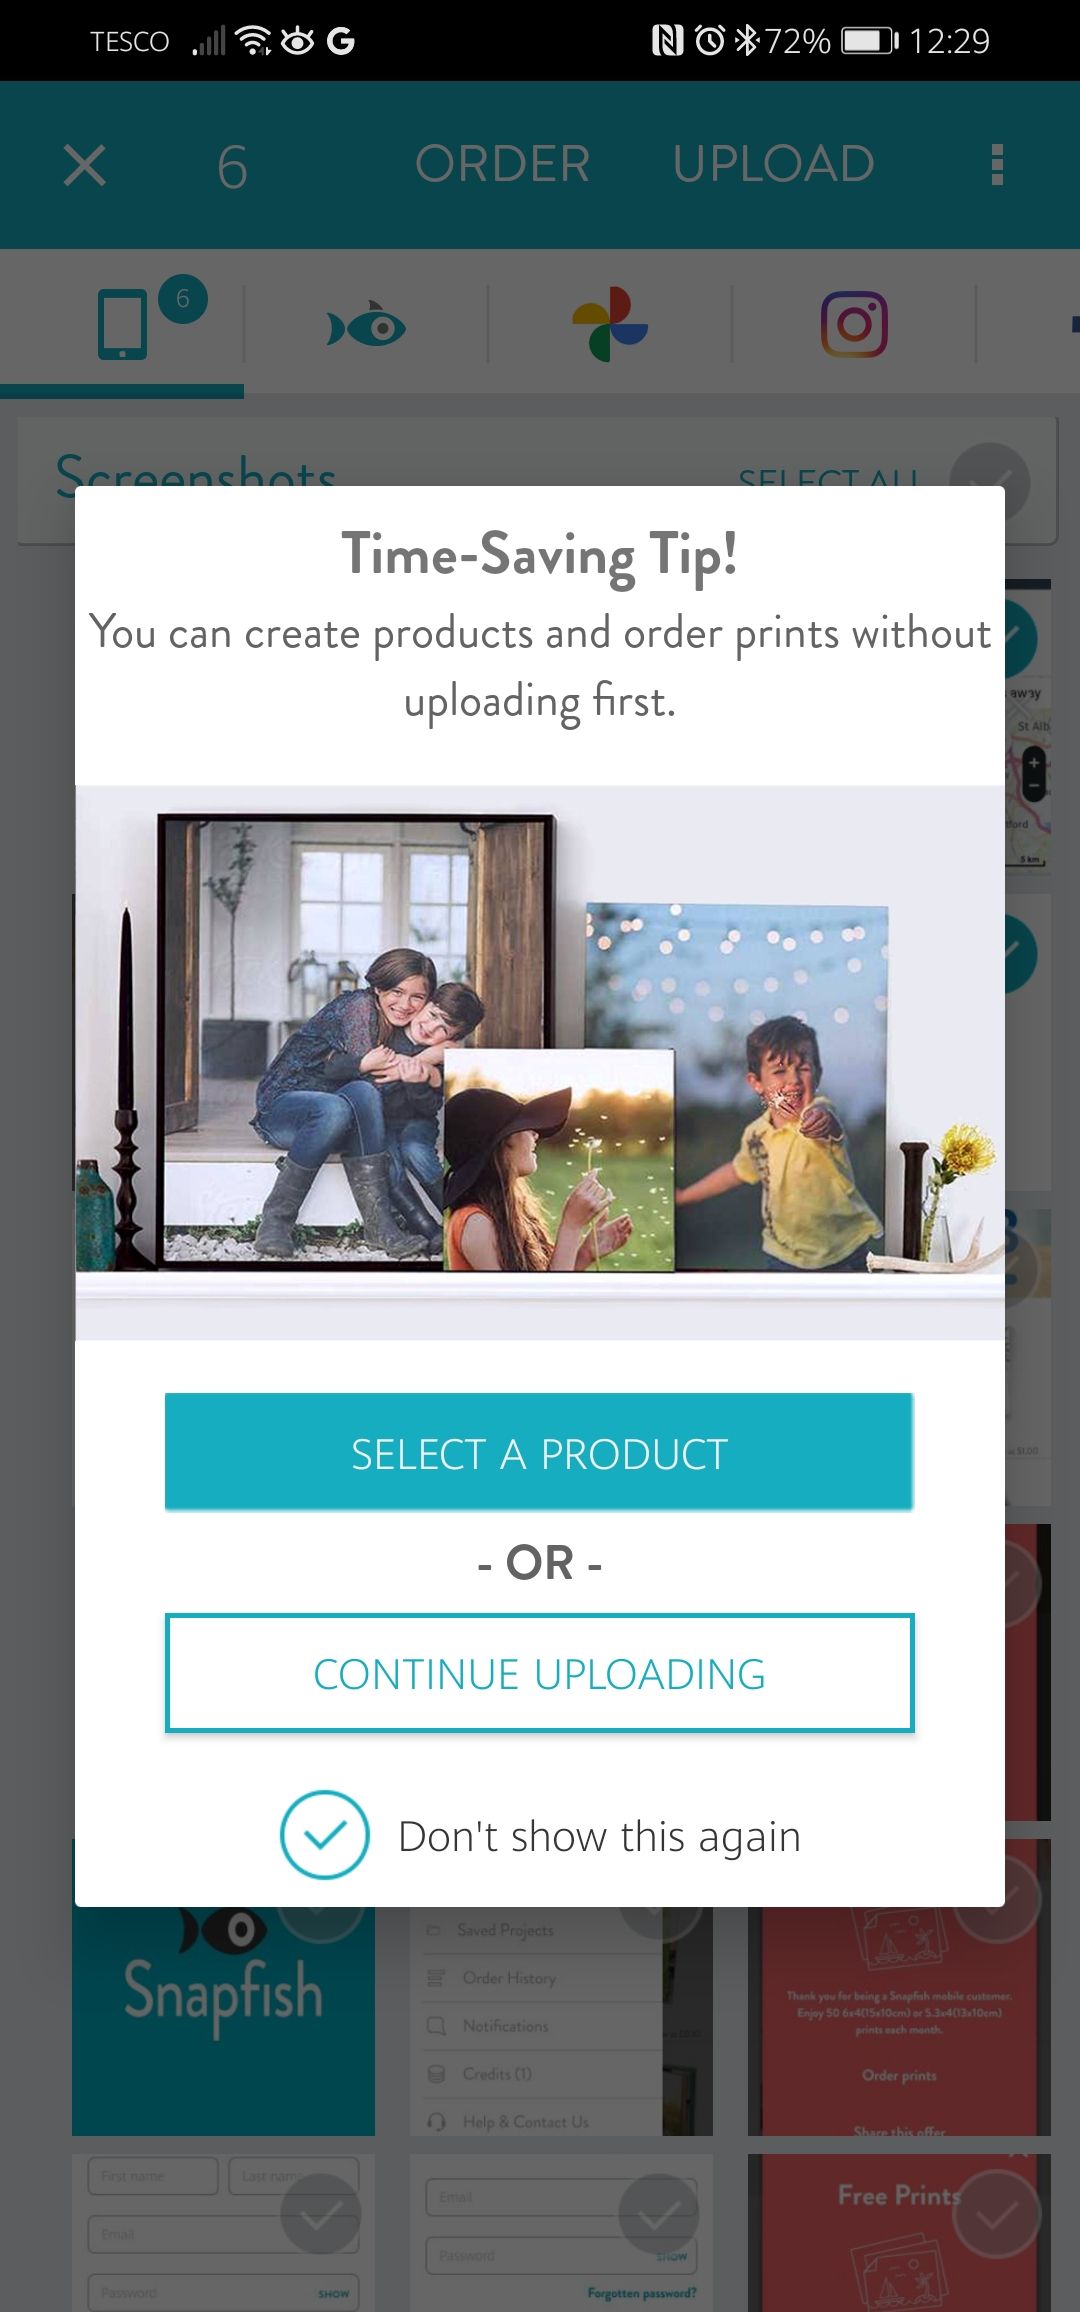 Uploading select product or continue